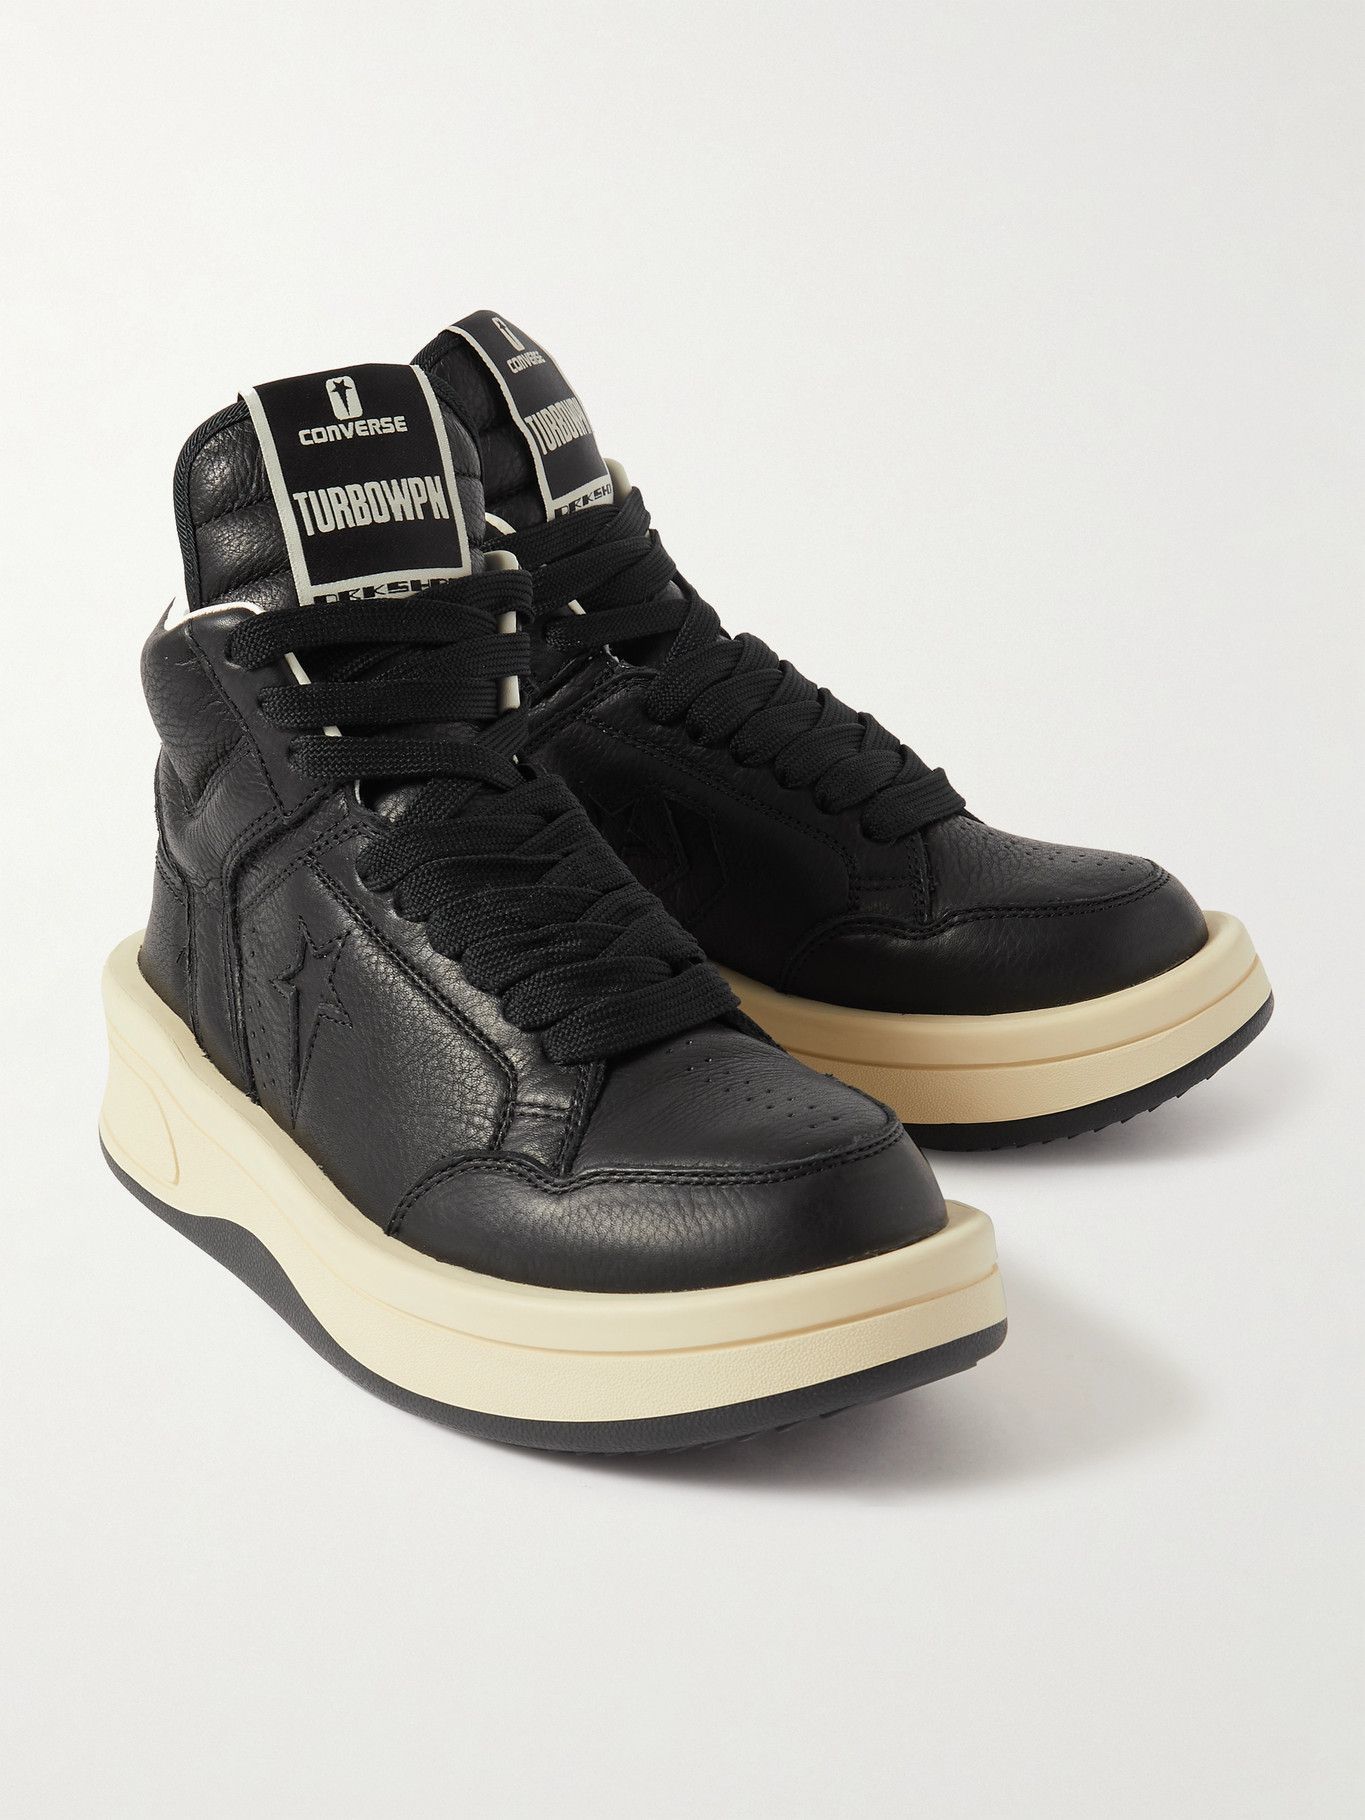 Rick Owens - Converse TURBOWPN Weapon Leather High-Top Sneakers - Black ...